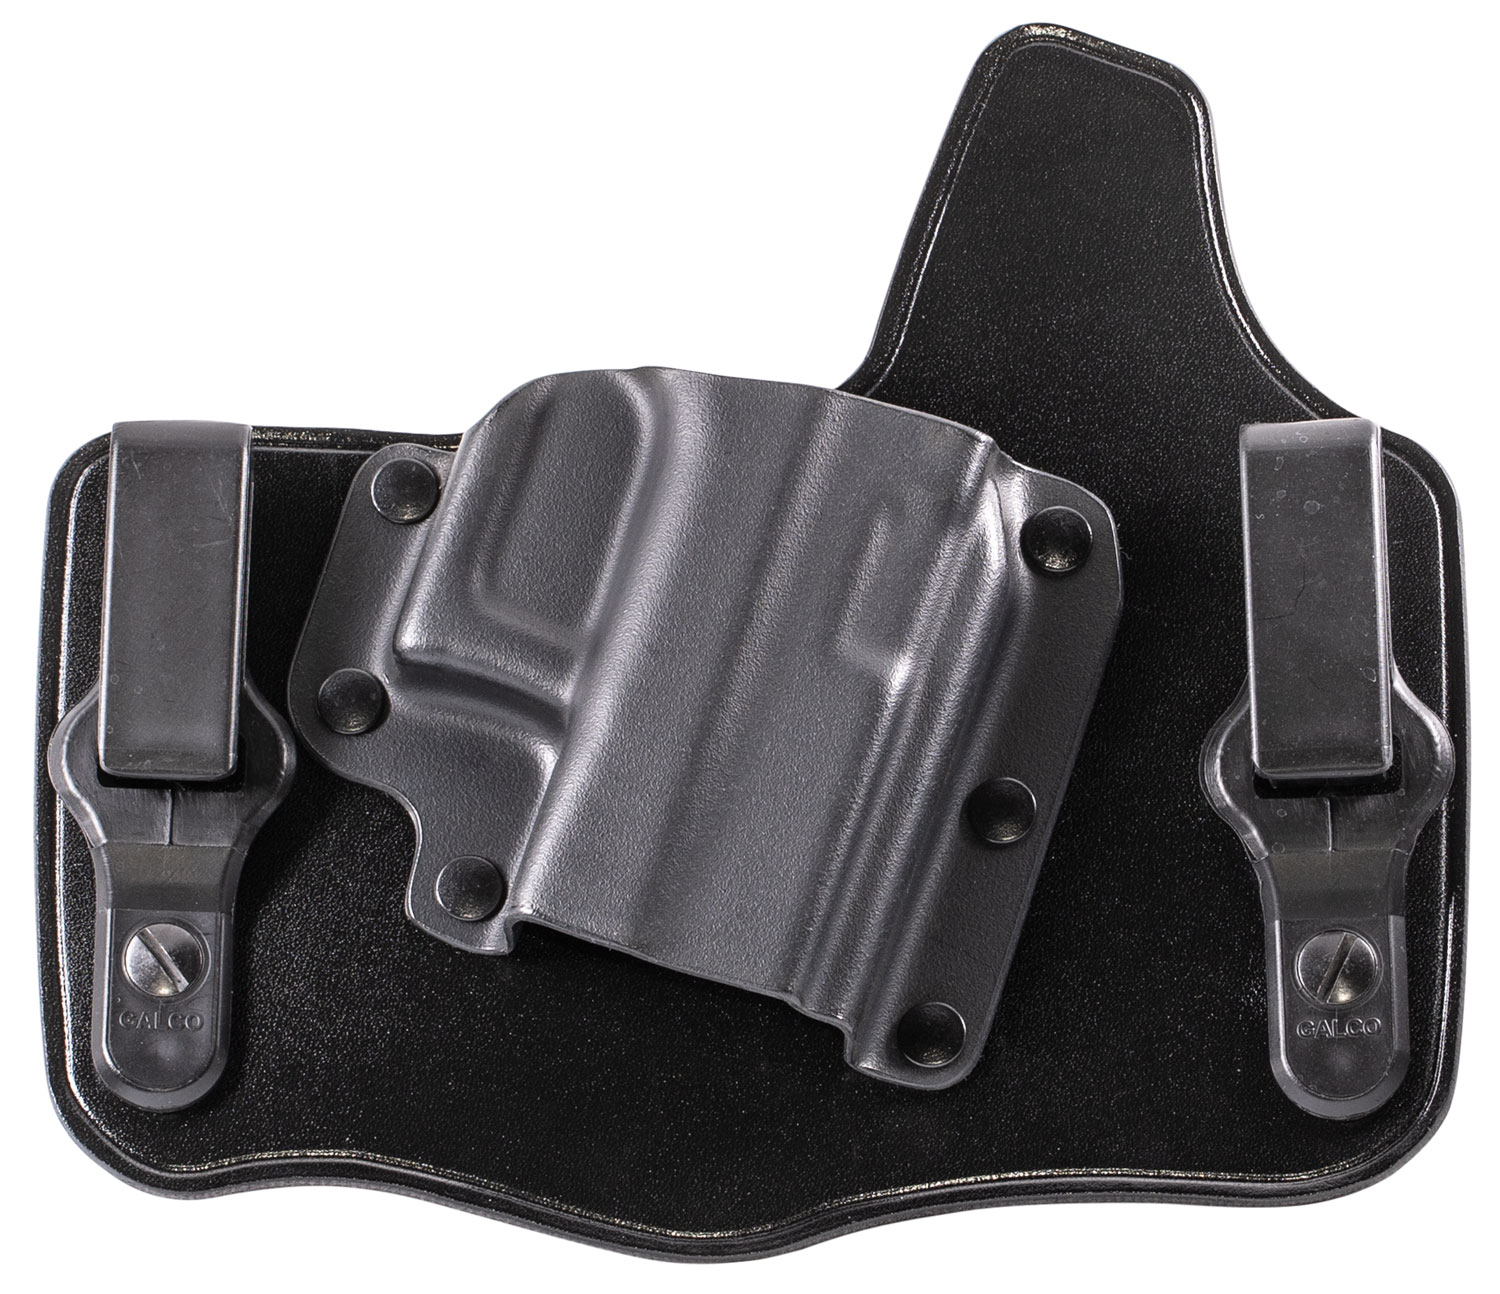 Galco KC800B KingTuk Classic Black Kydex Holster w/Leather Backing IWB fits Glock 43, 43x Right Hand